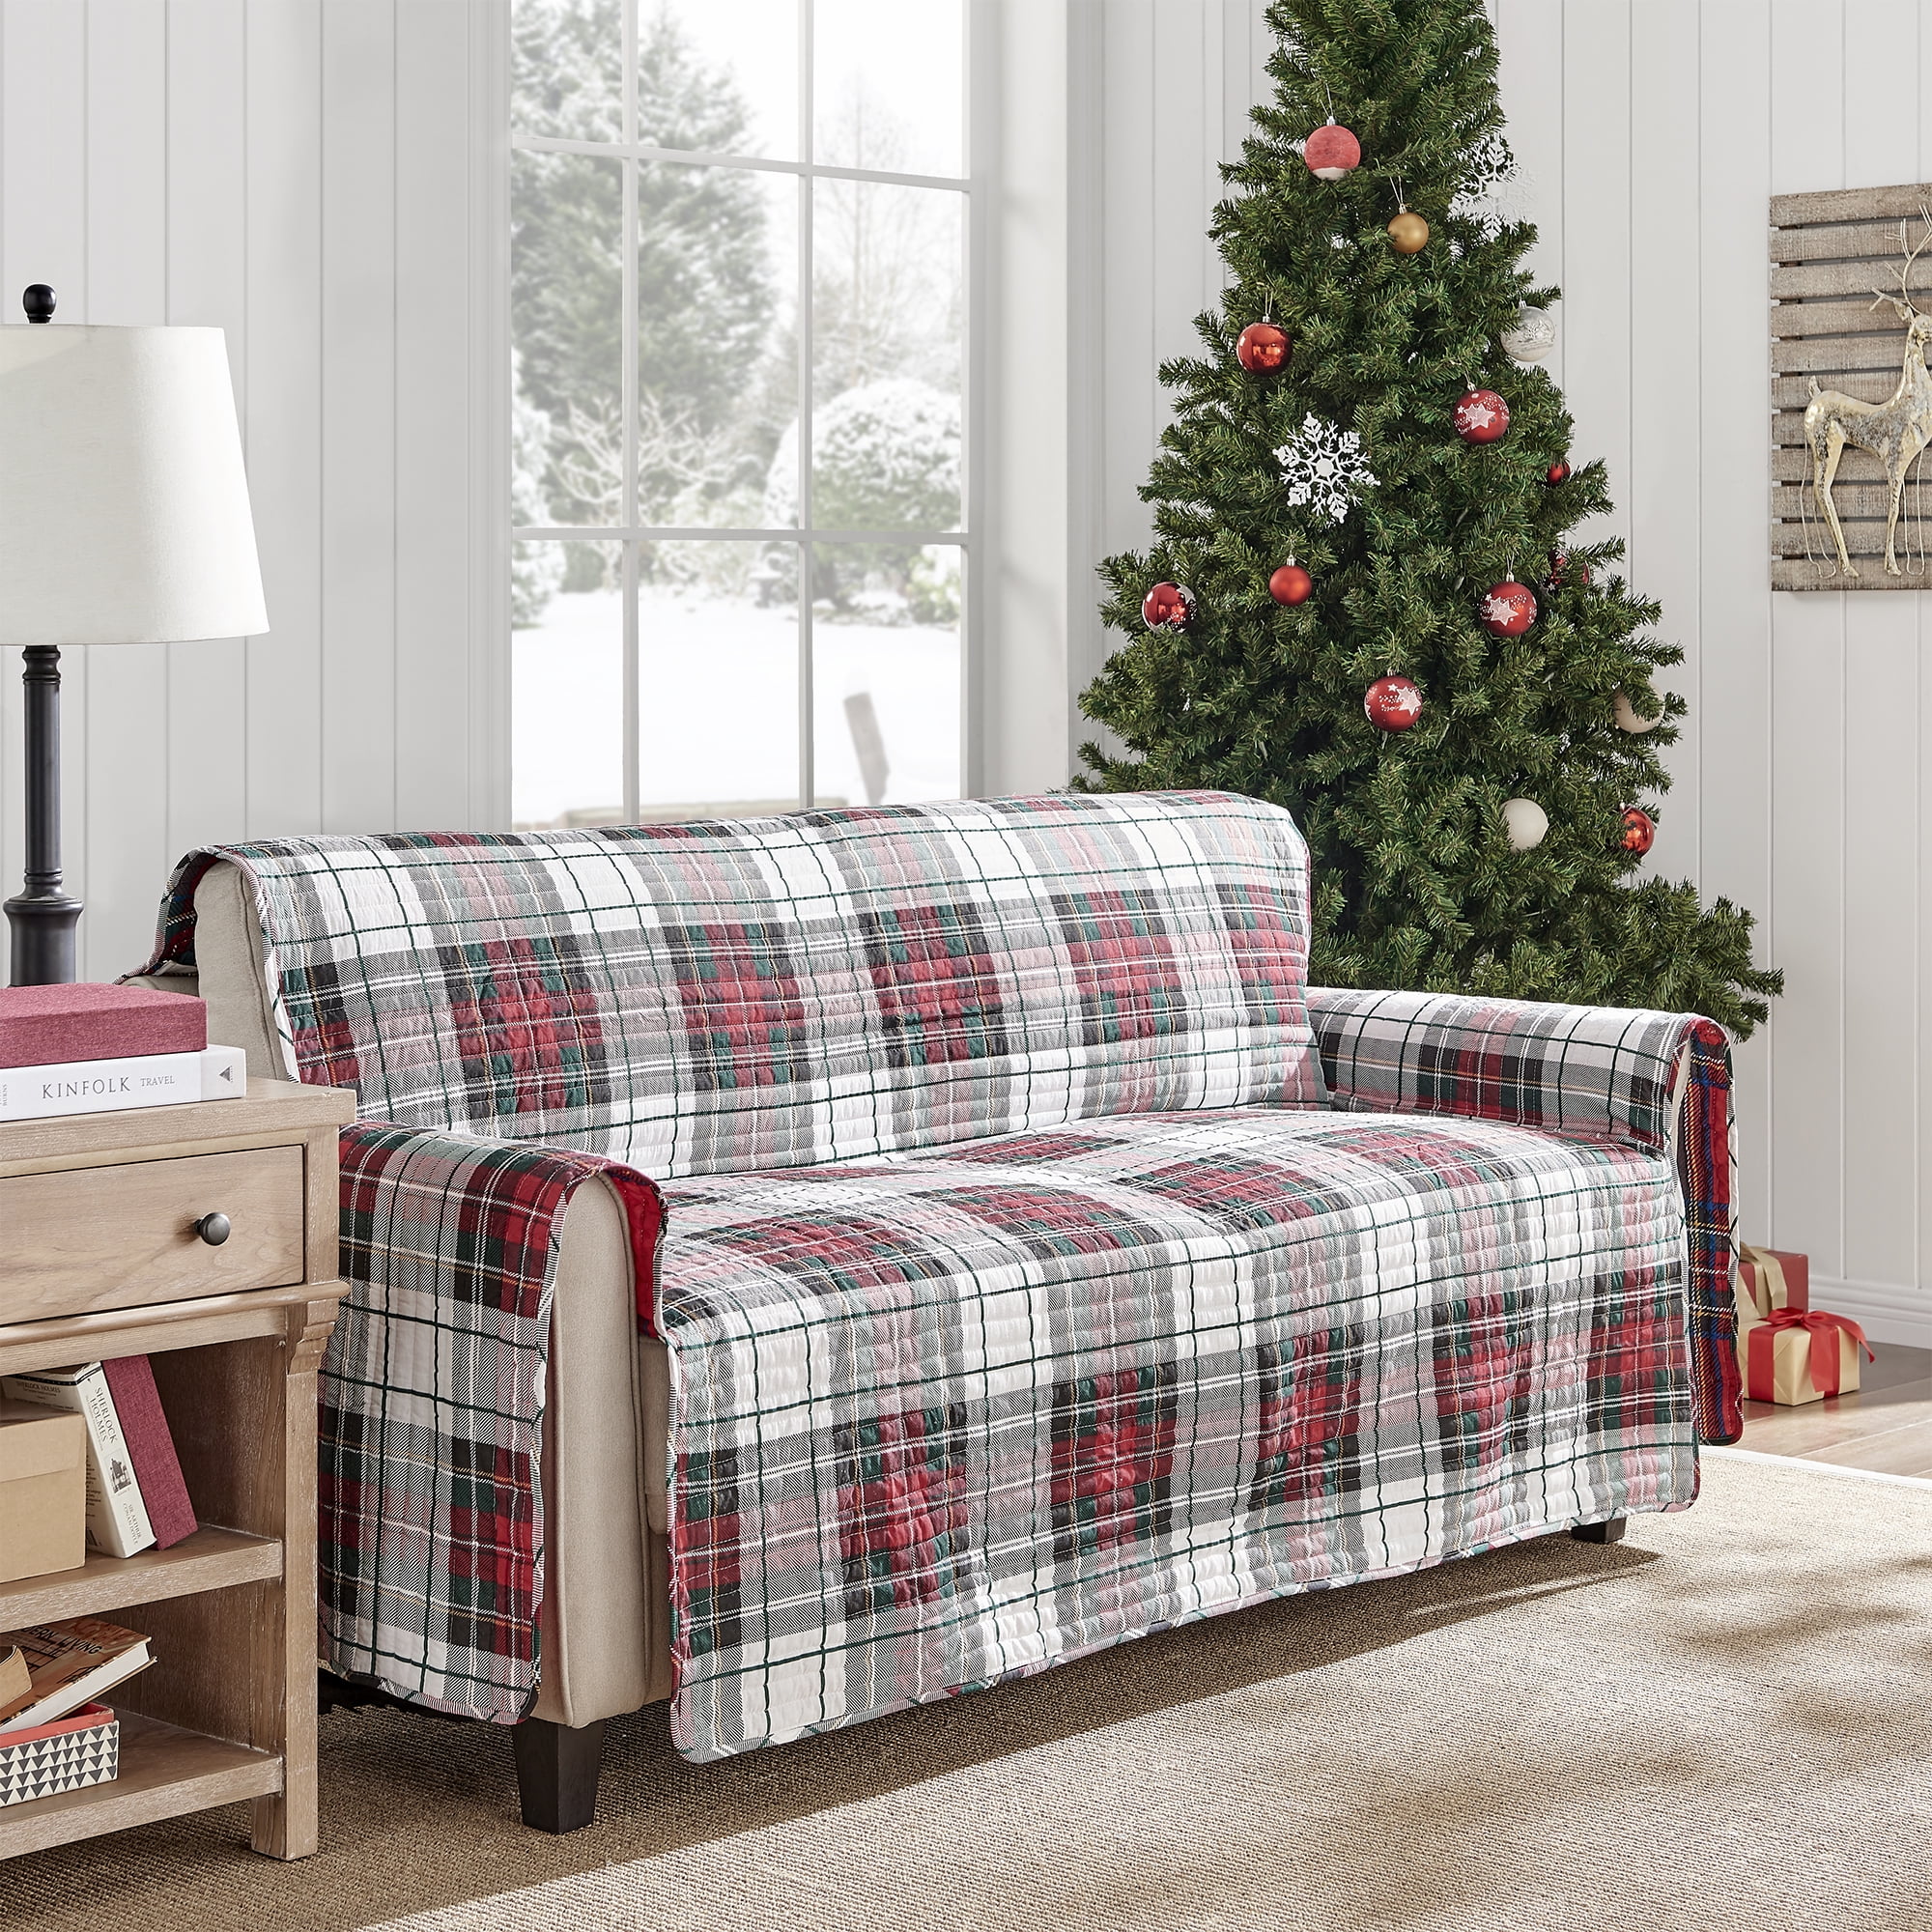 Levtex Home - Spencer Plaid Furniture Cover (Small) - 103in x 76in - Seat  Up To 45in Wide- Reversible - Tartan Plaid - Red, Green, White, Blue, Gold  - Cotton/Microfiber 